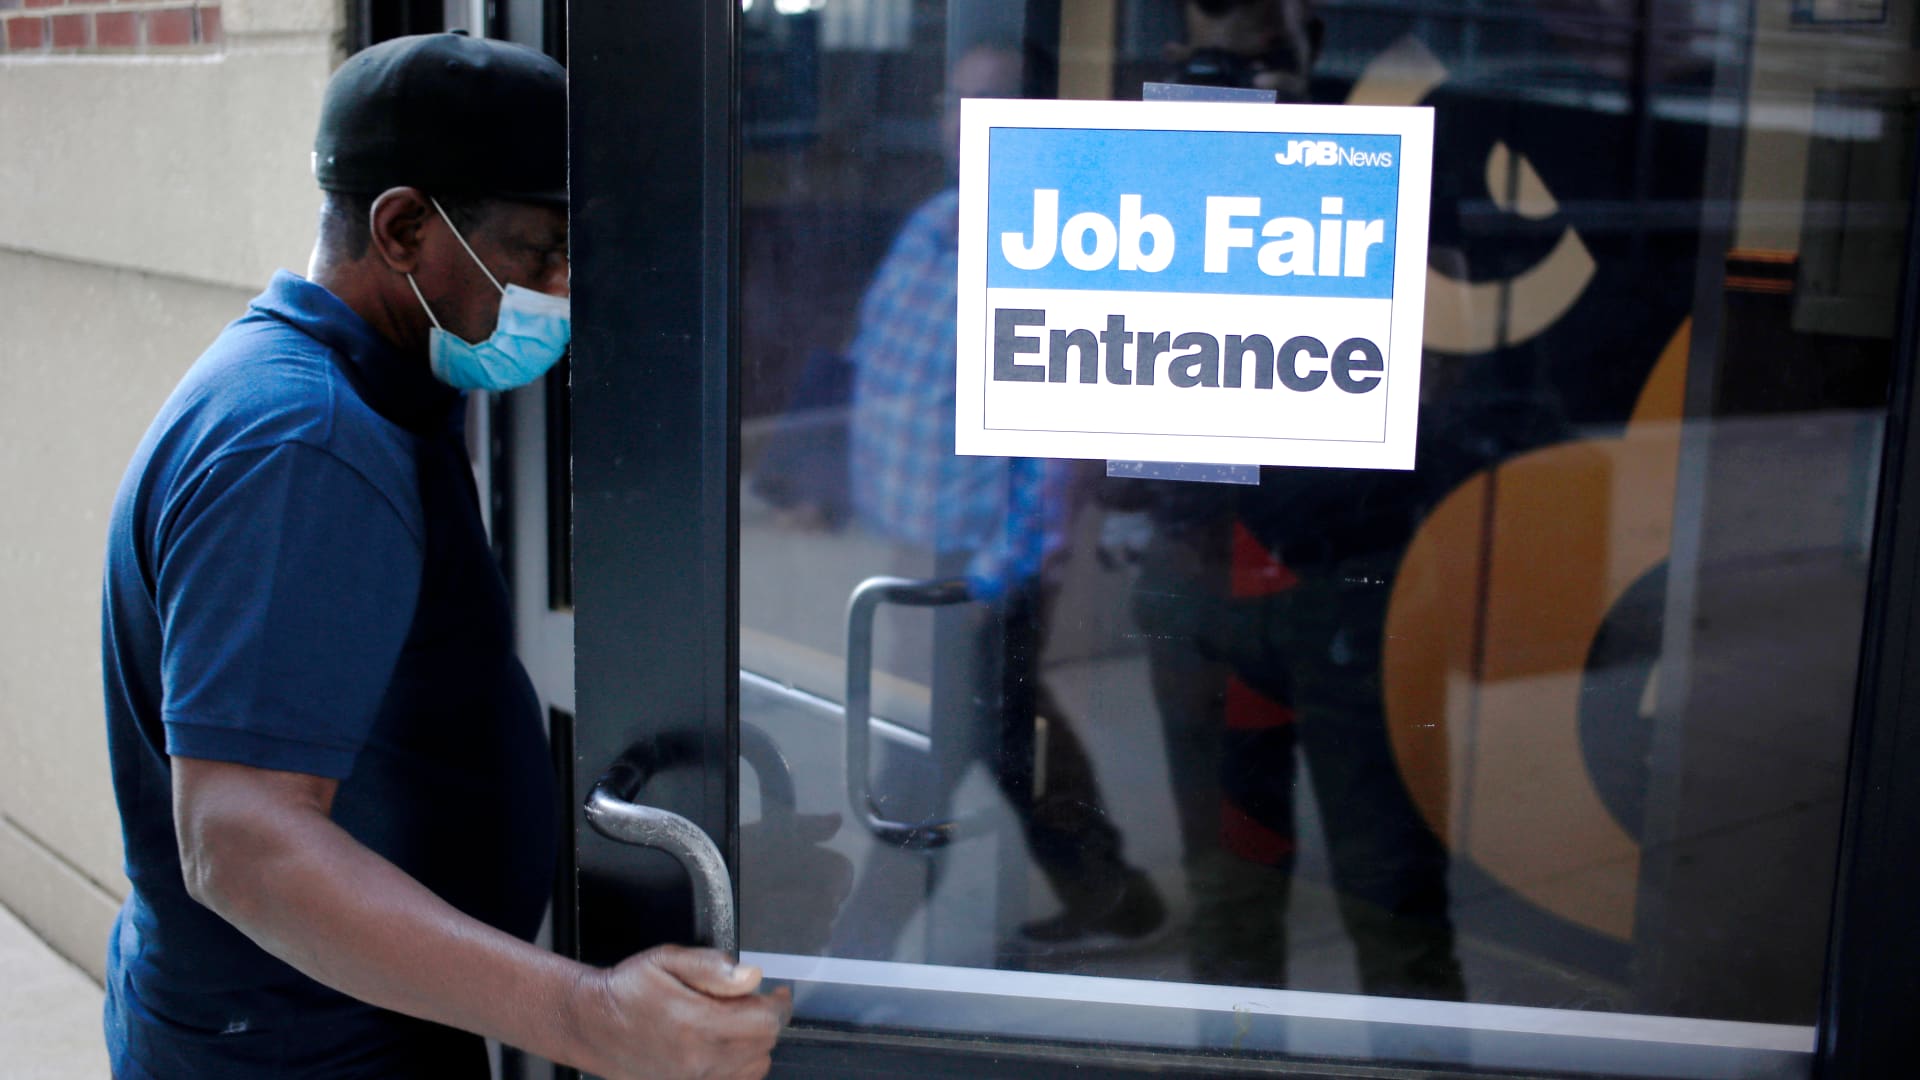 Job openings nudged lower, down to 1.4 per available worker